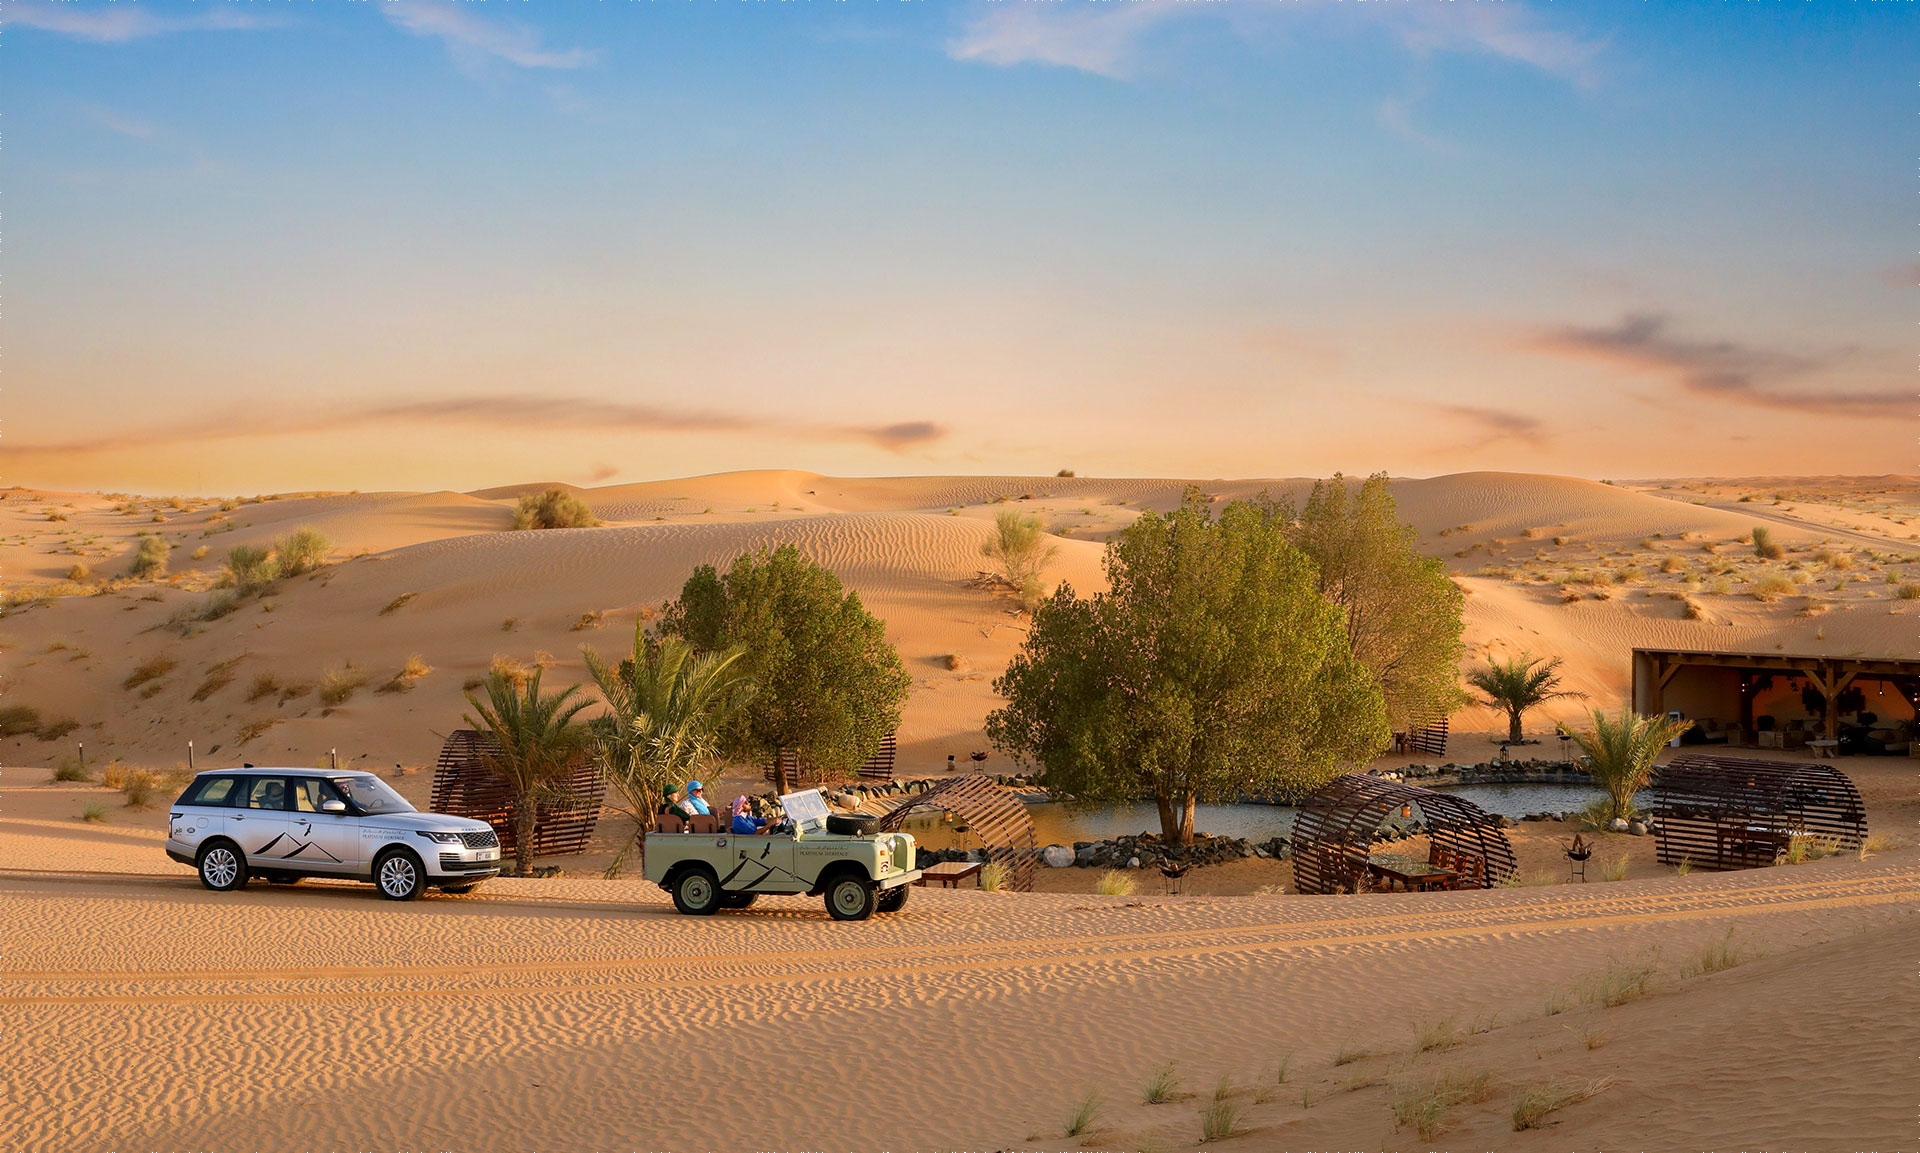 Which Platinum Heritage Desert Safari is right for me?